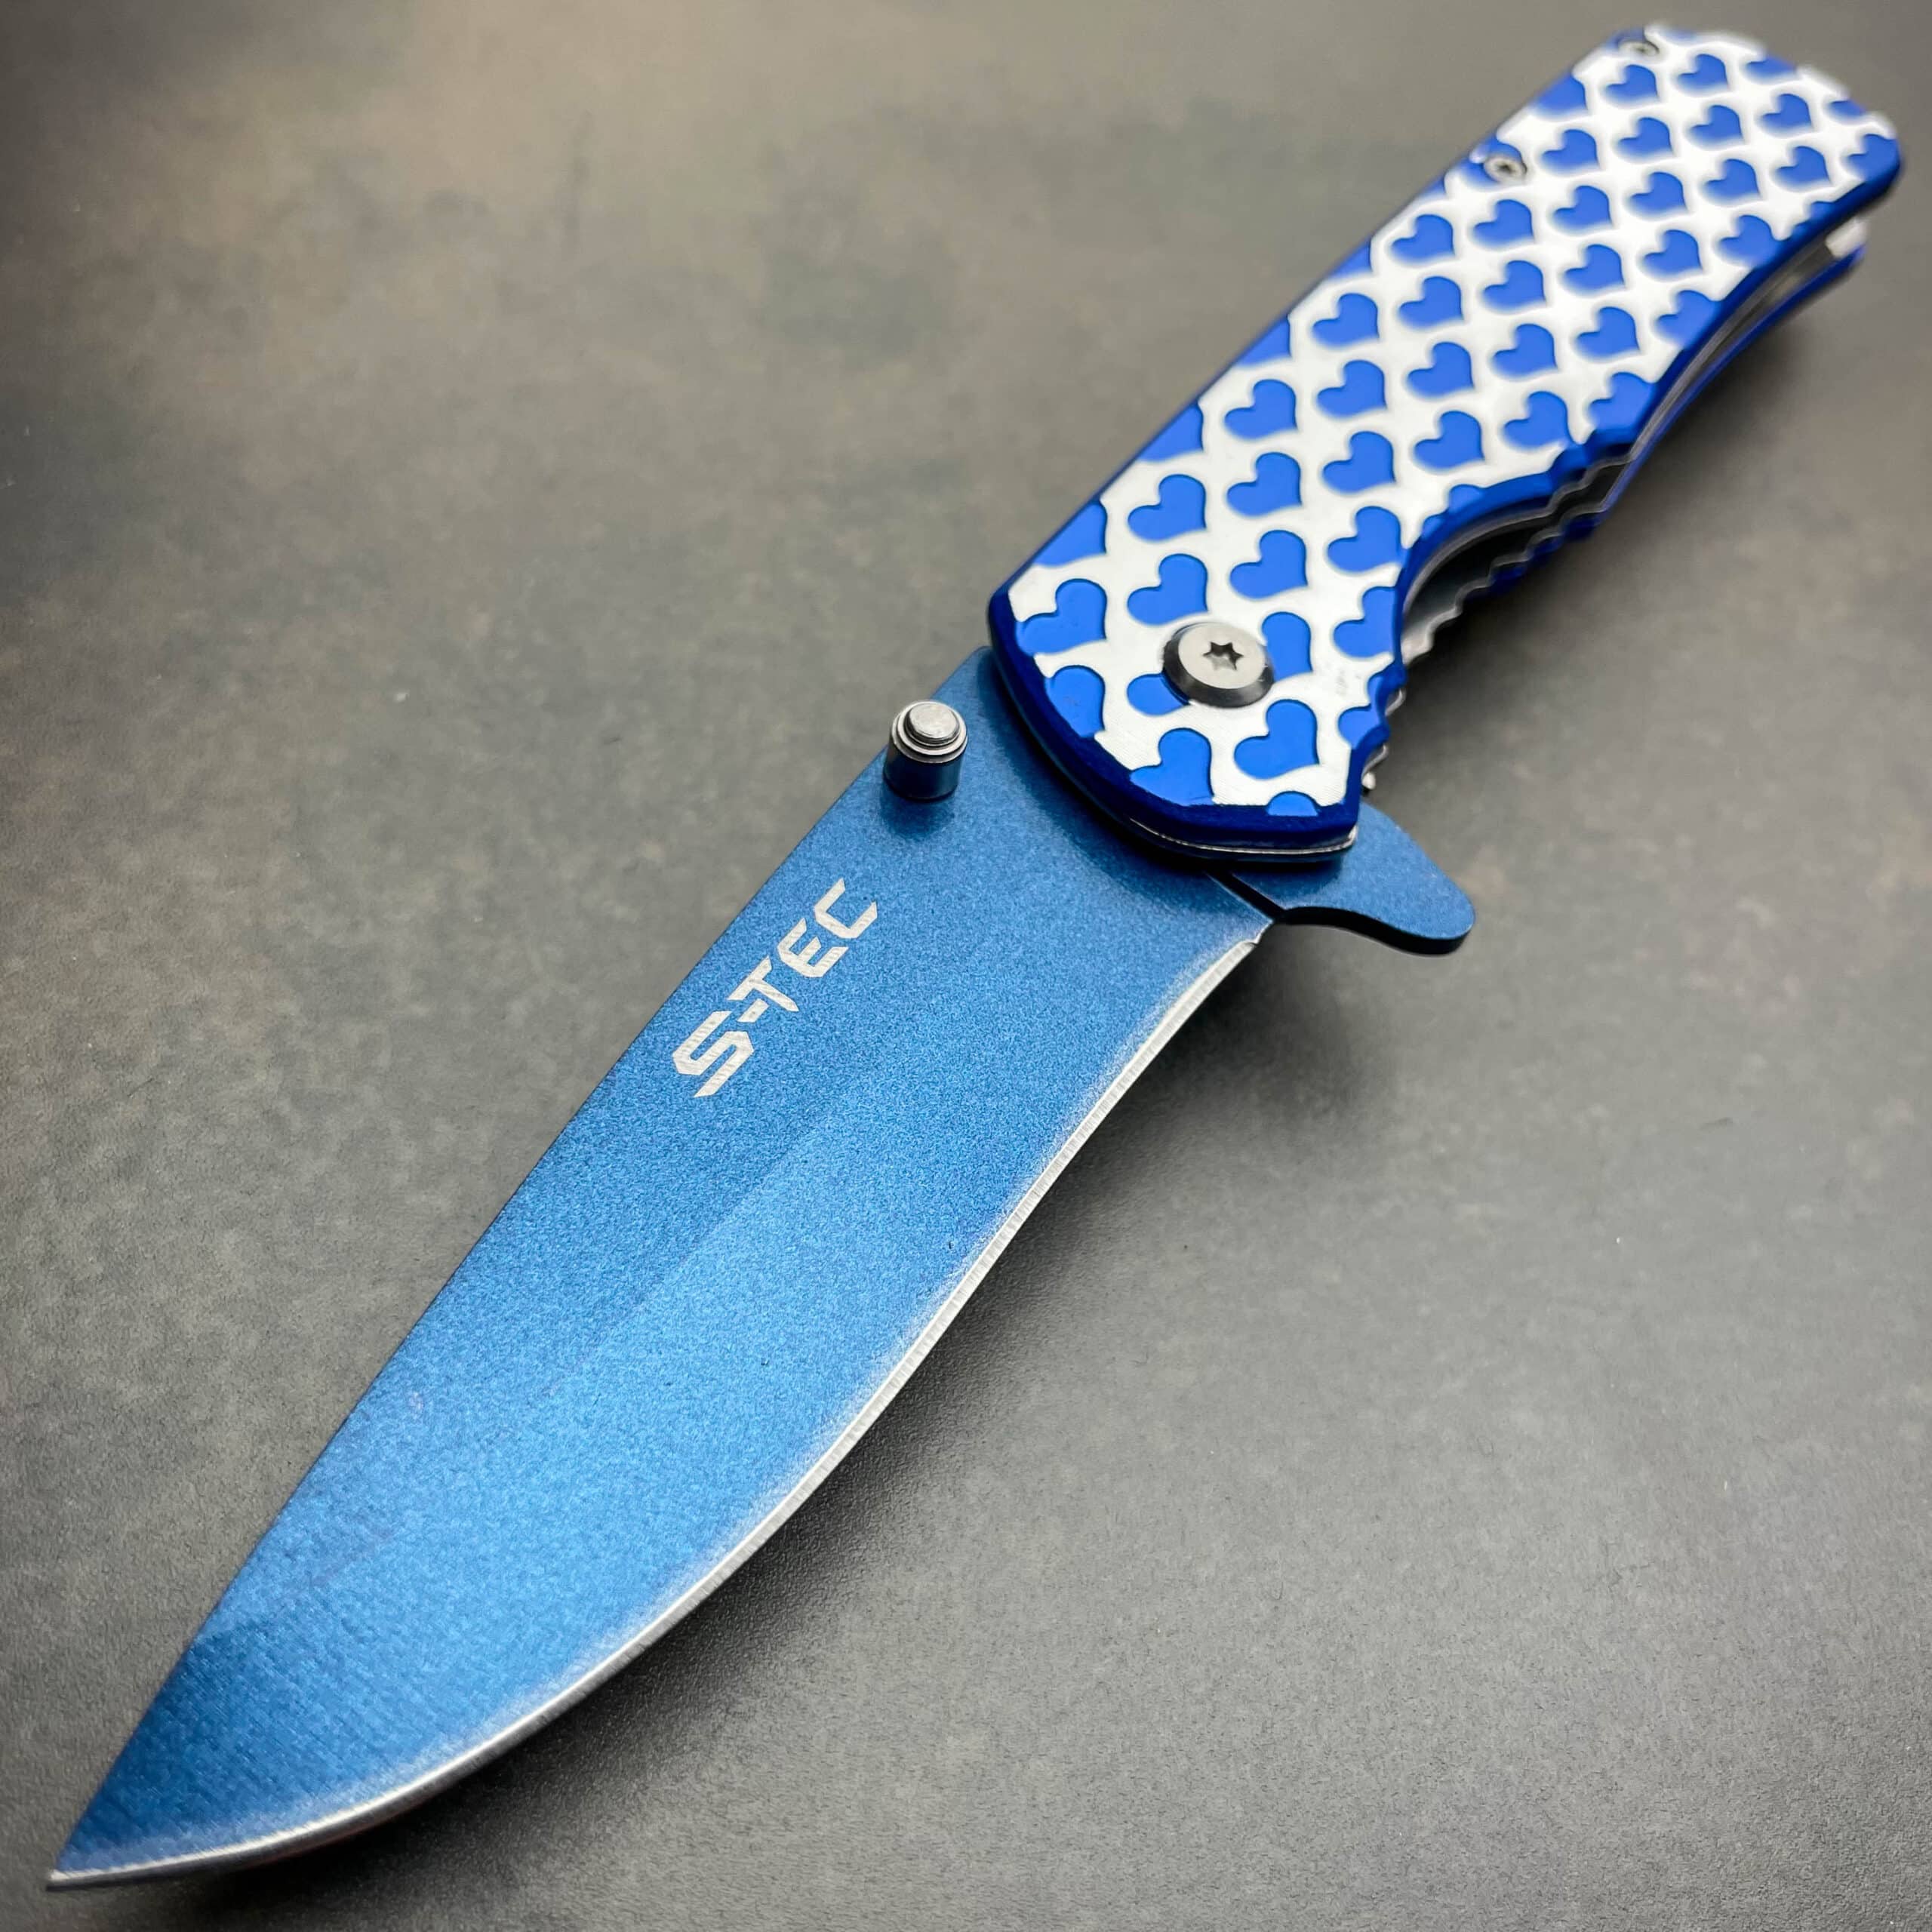 8″ HEARTS TACTICAL Combat Spring Assisted Open Folding Pocket Knife BLUE Tool